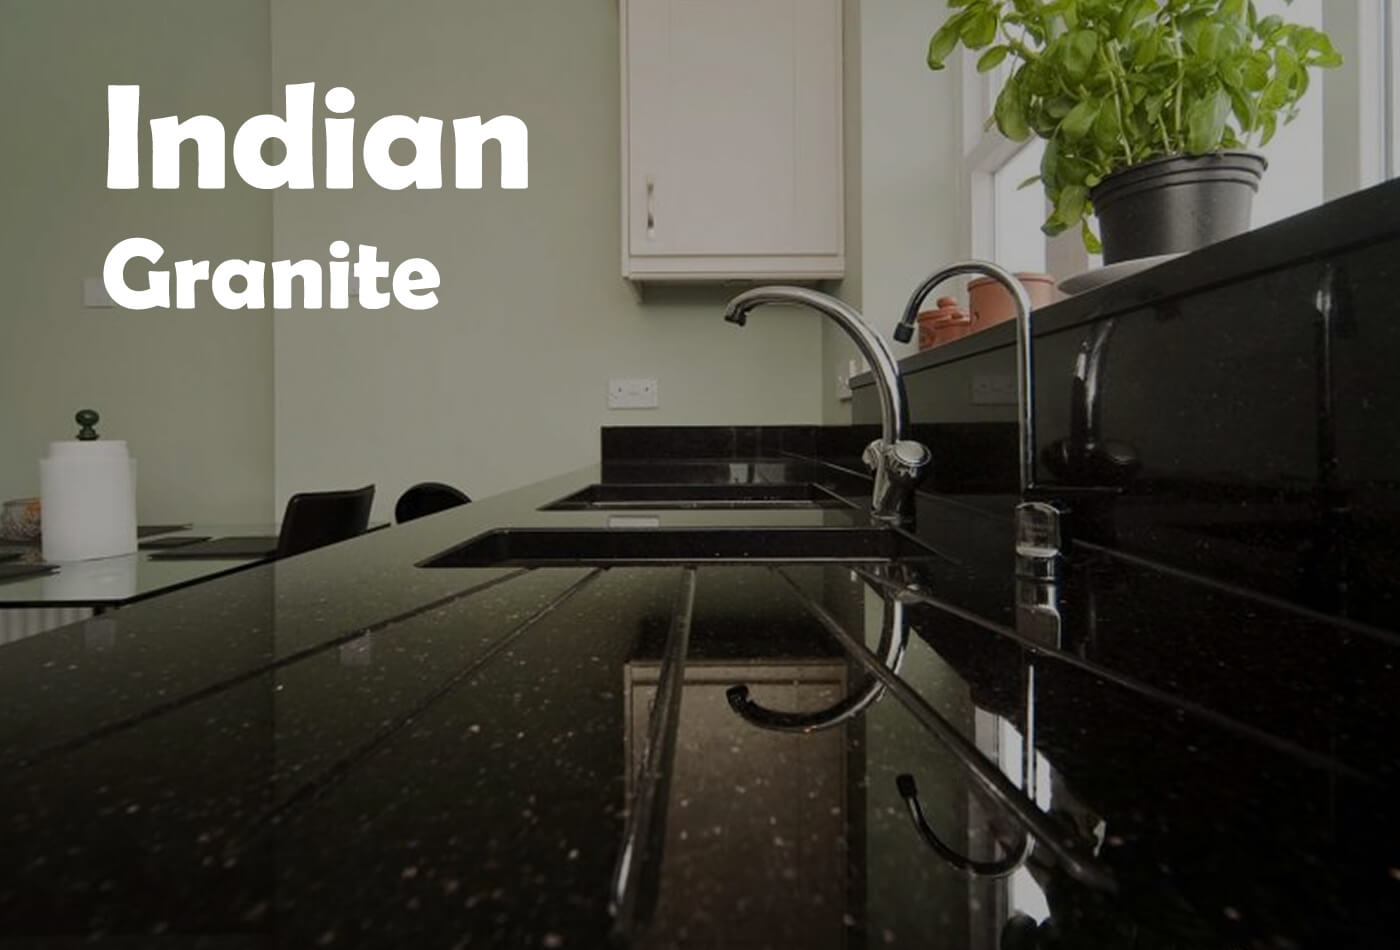 Indian Granite: Let's Talk About Its USP (Unique Selling Point)